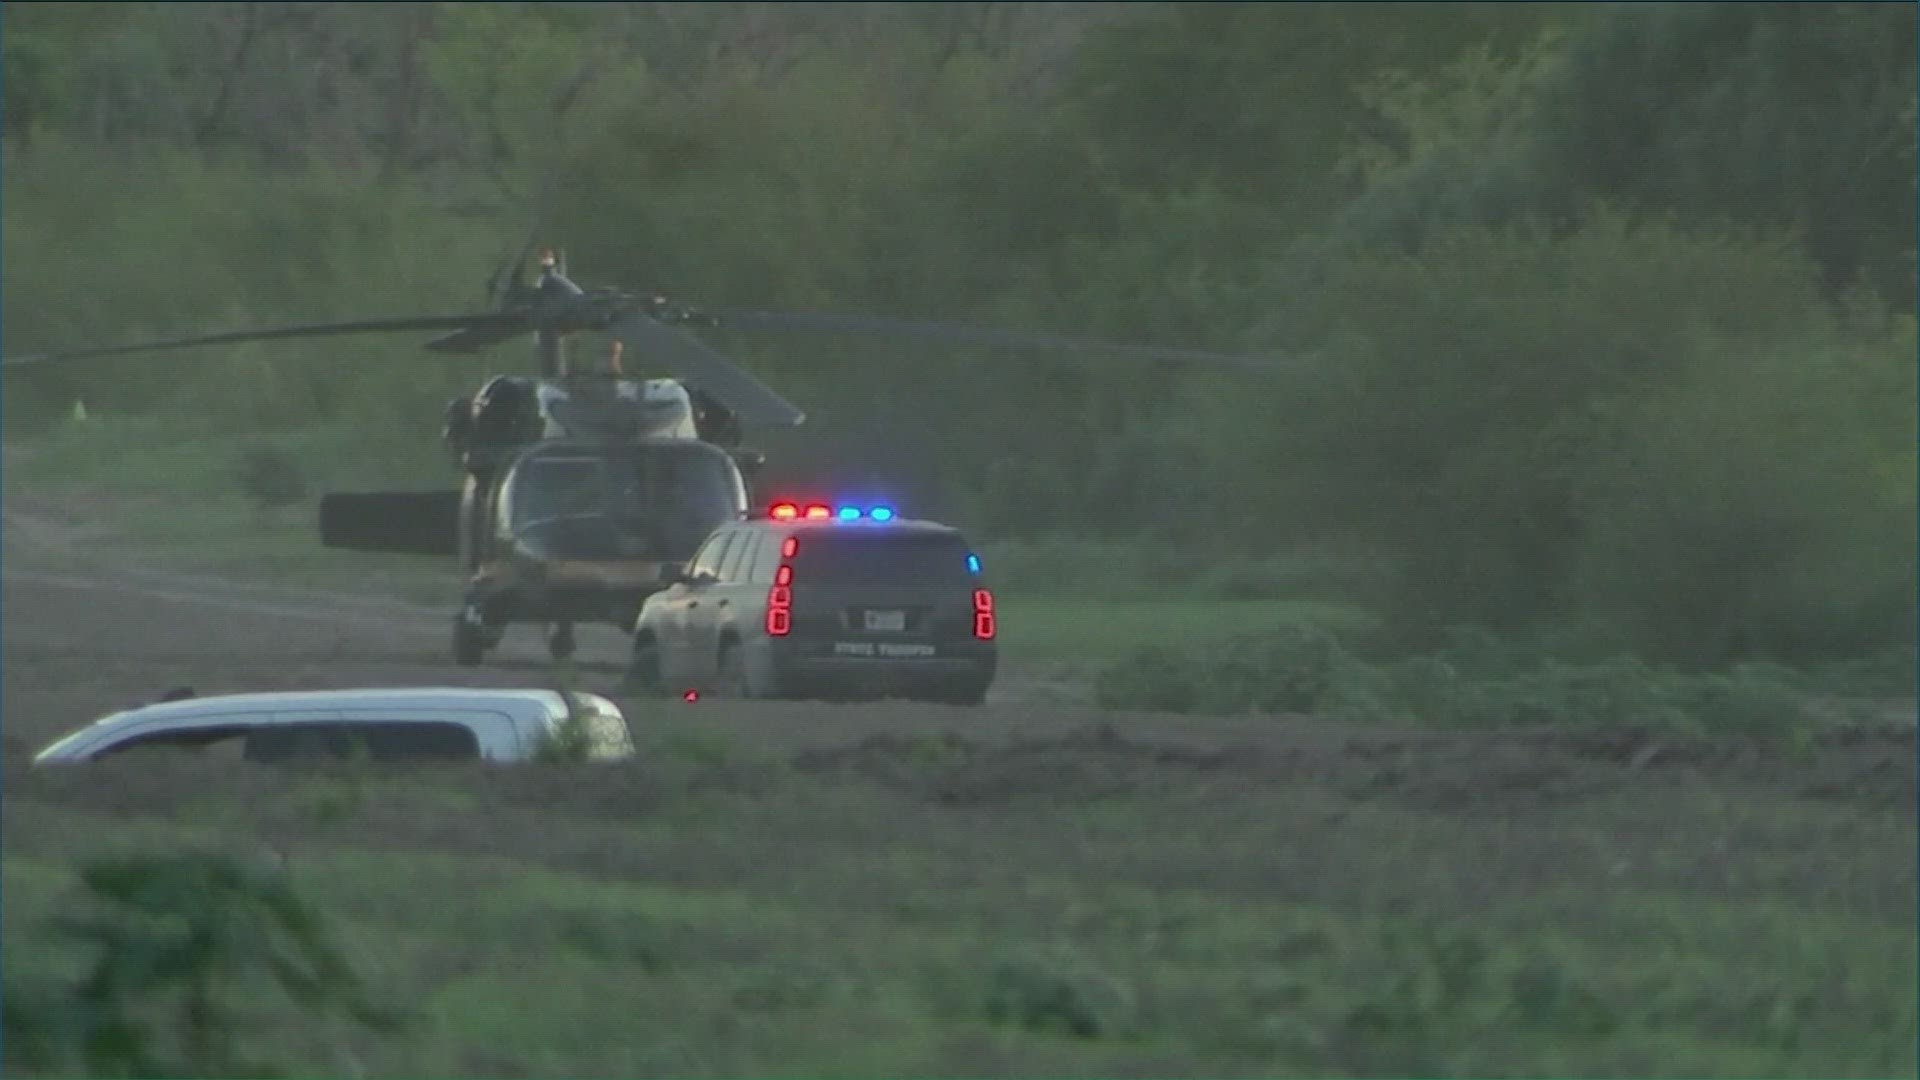 Federal officials said the helicopter crash just before 3 p.m. Mountain Time near the town of La Grulla.